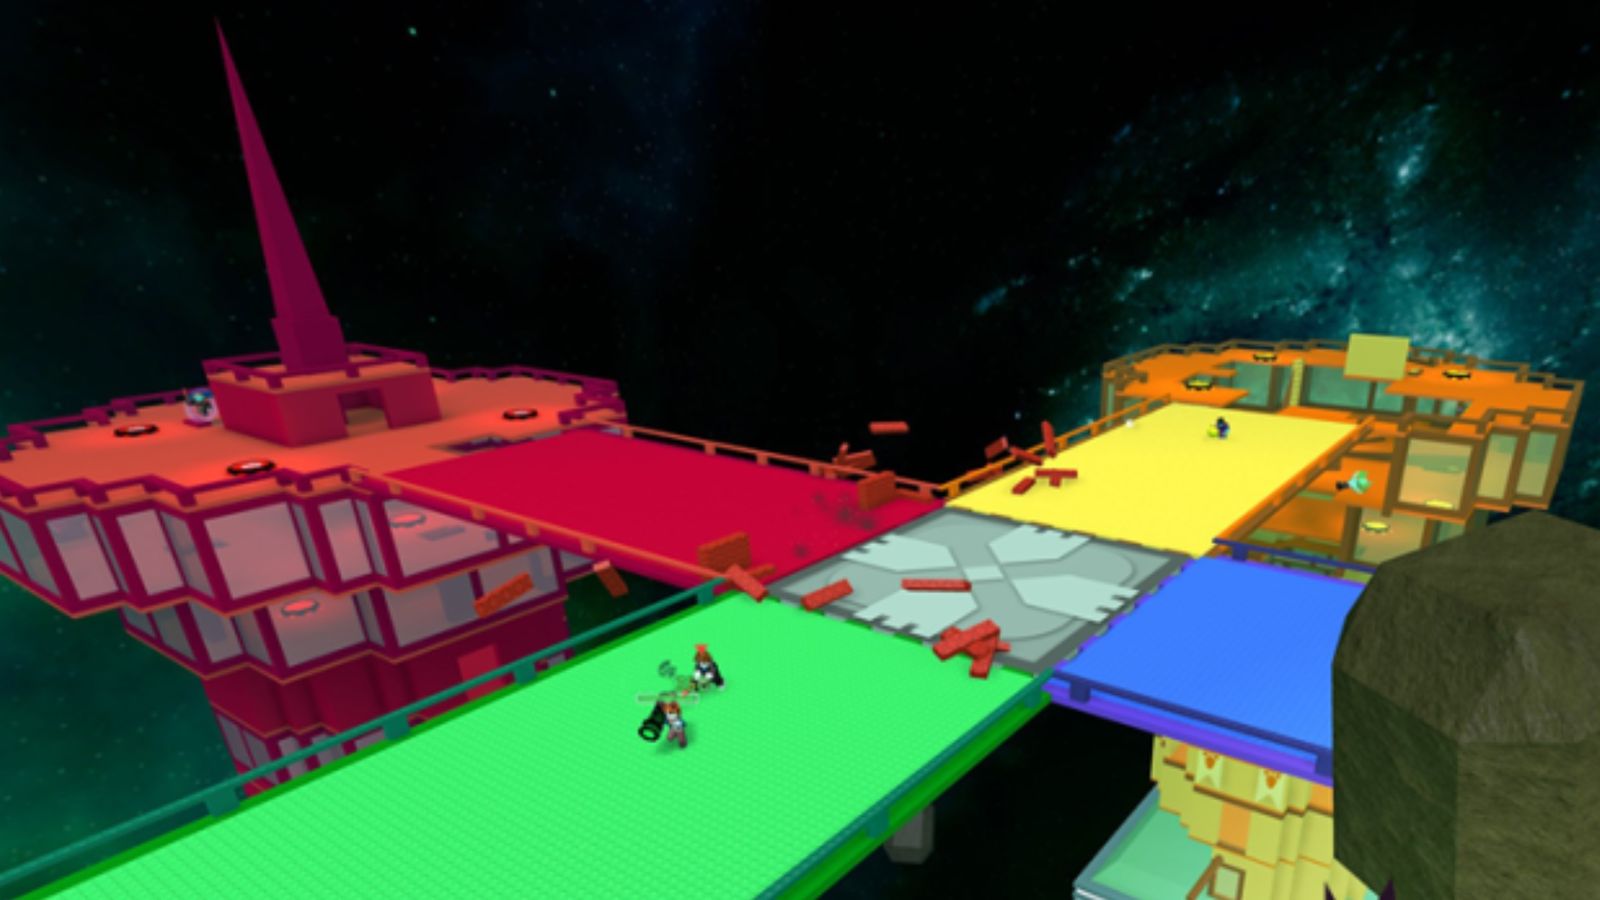 Screenshot from Super Doomspire, with red, yellow, green, and blue towers battling